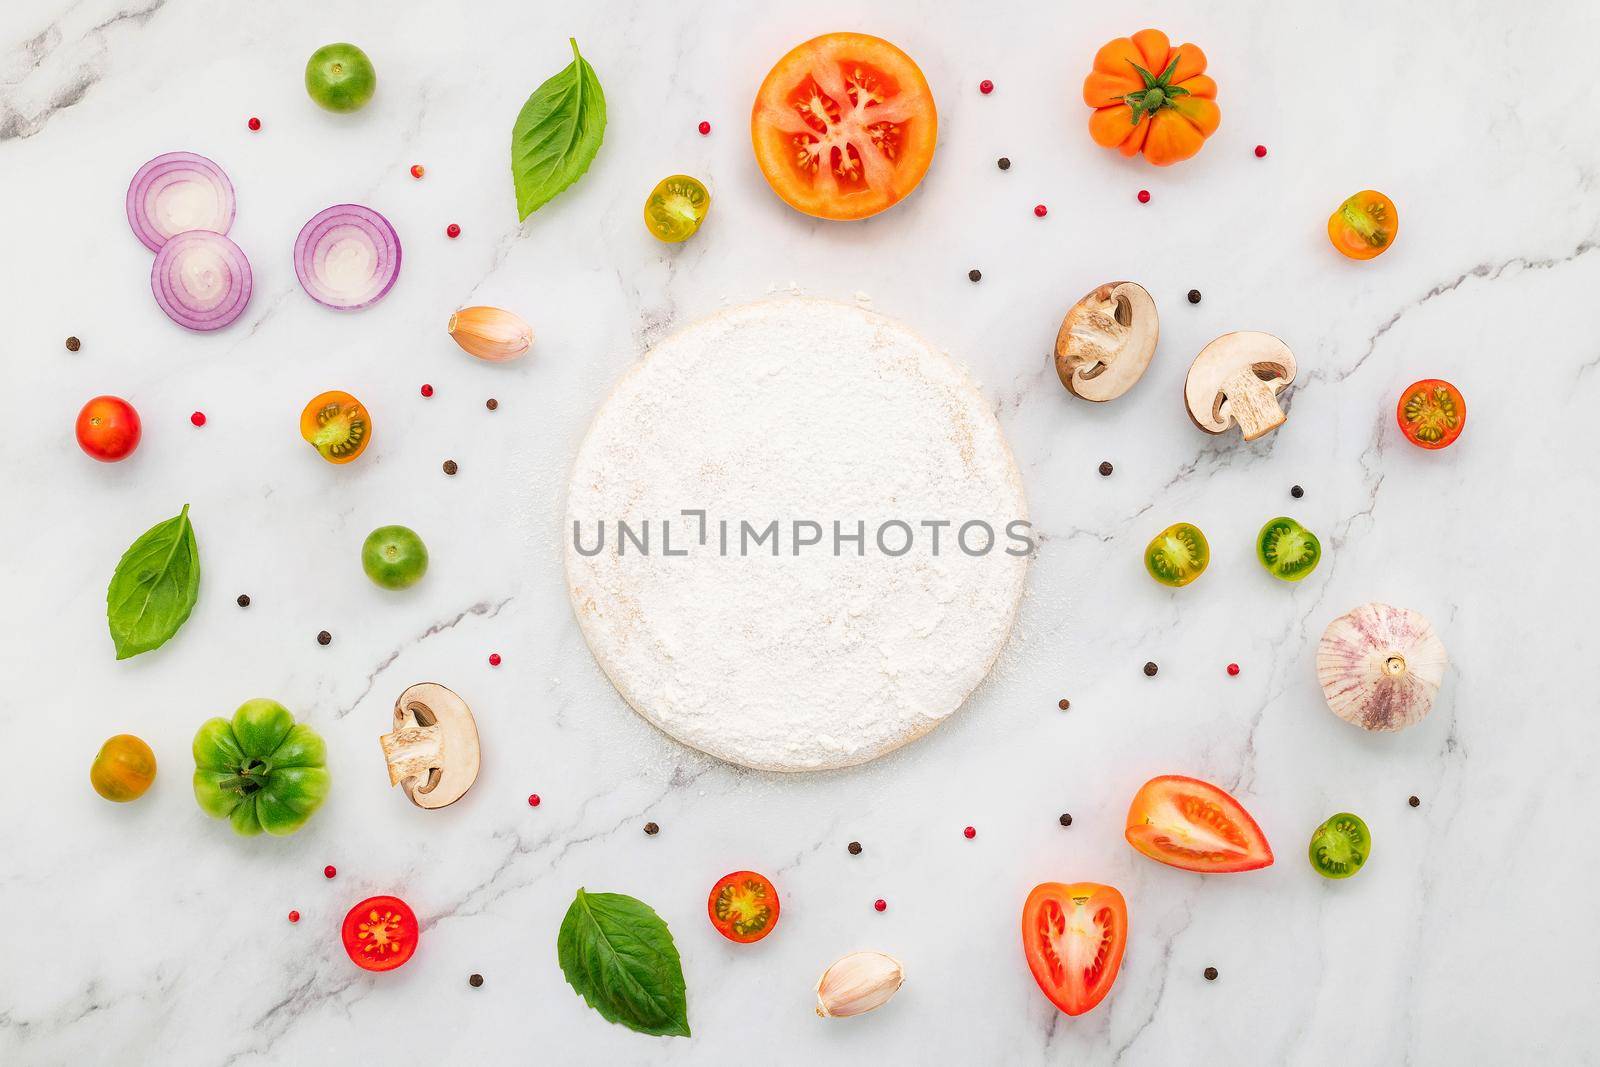 The ingredients for homemade pizza set up on white marble background.